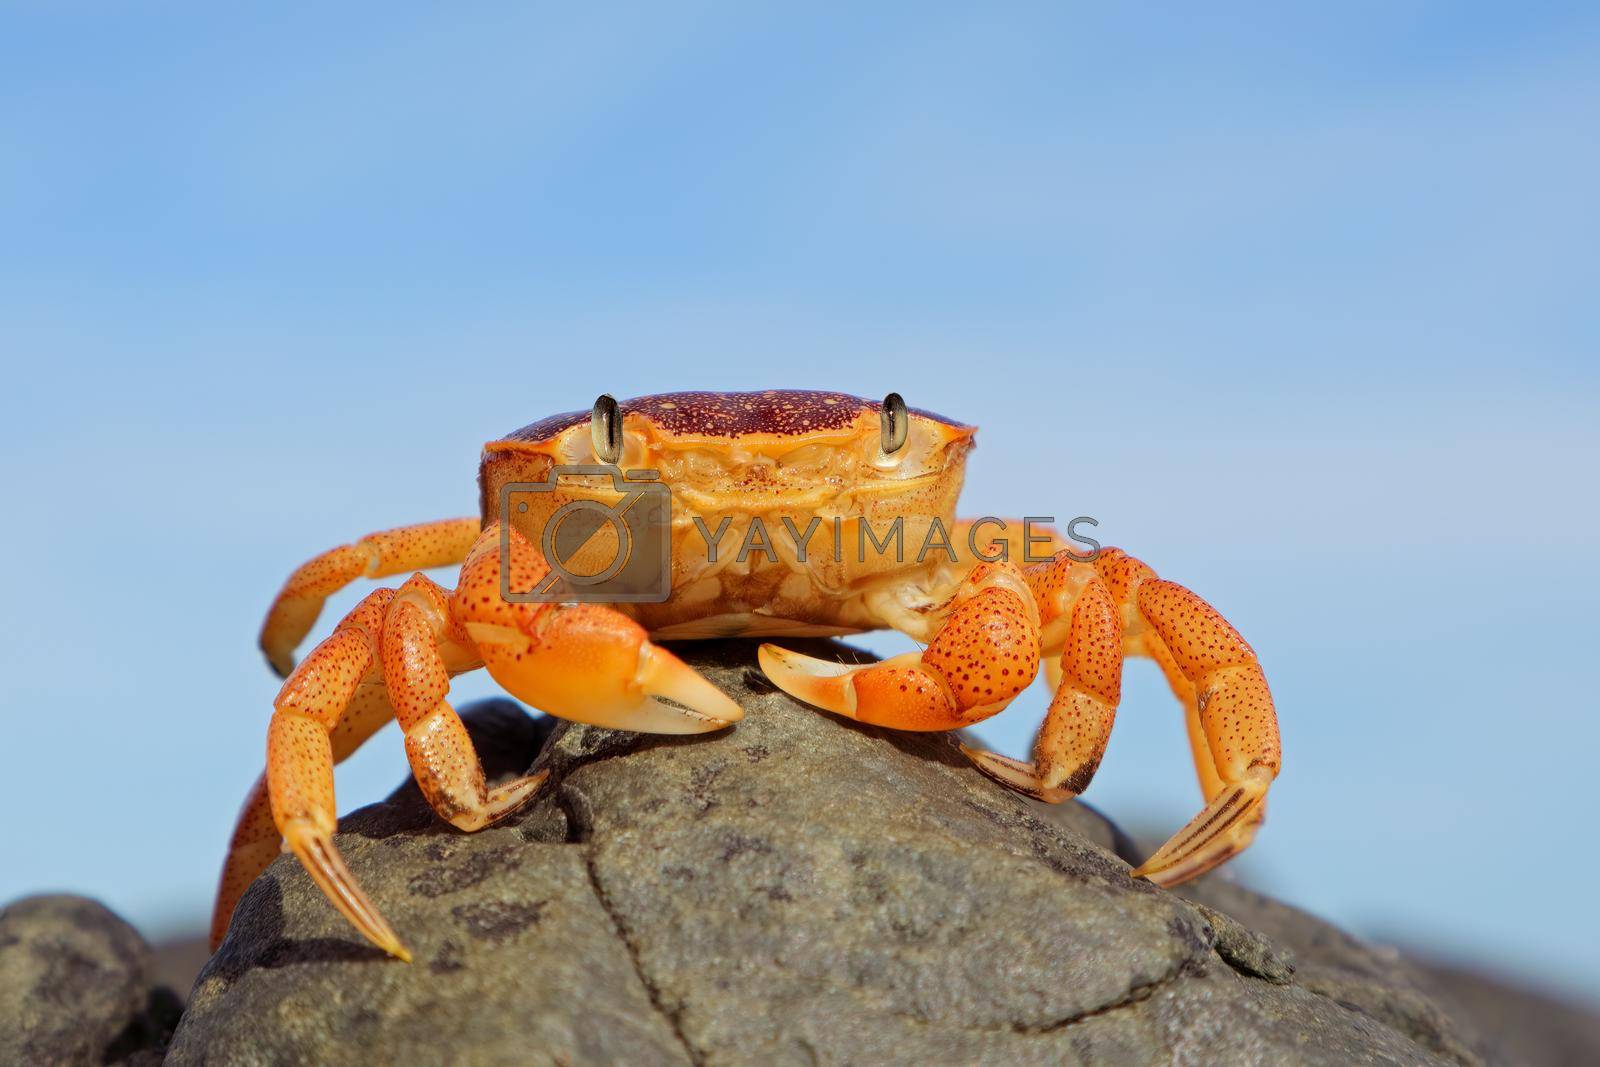 Royalty free image of Common shore crab on a rock by EcoPic